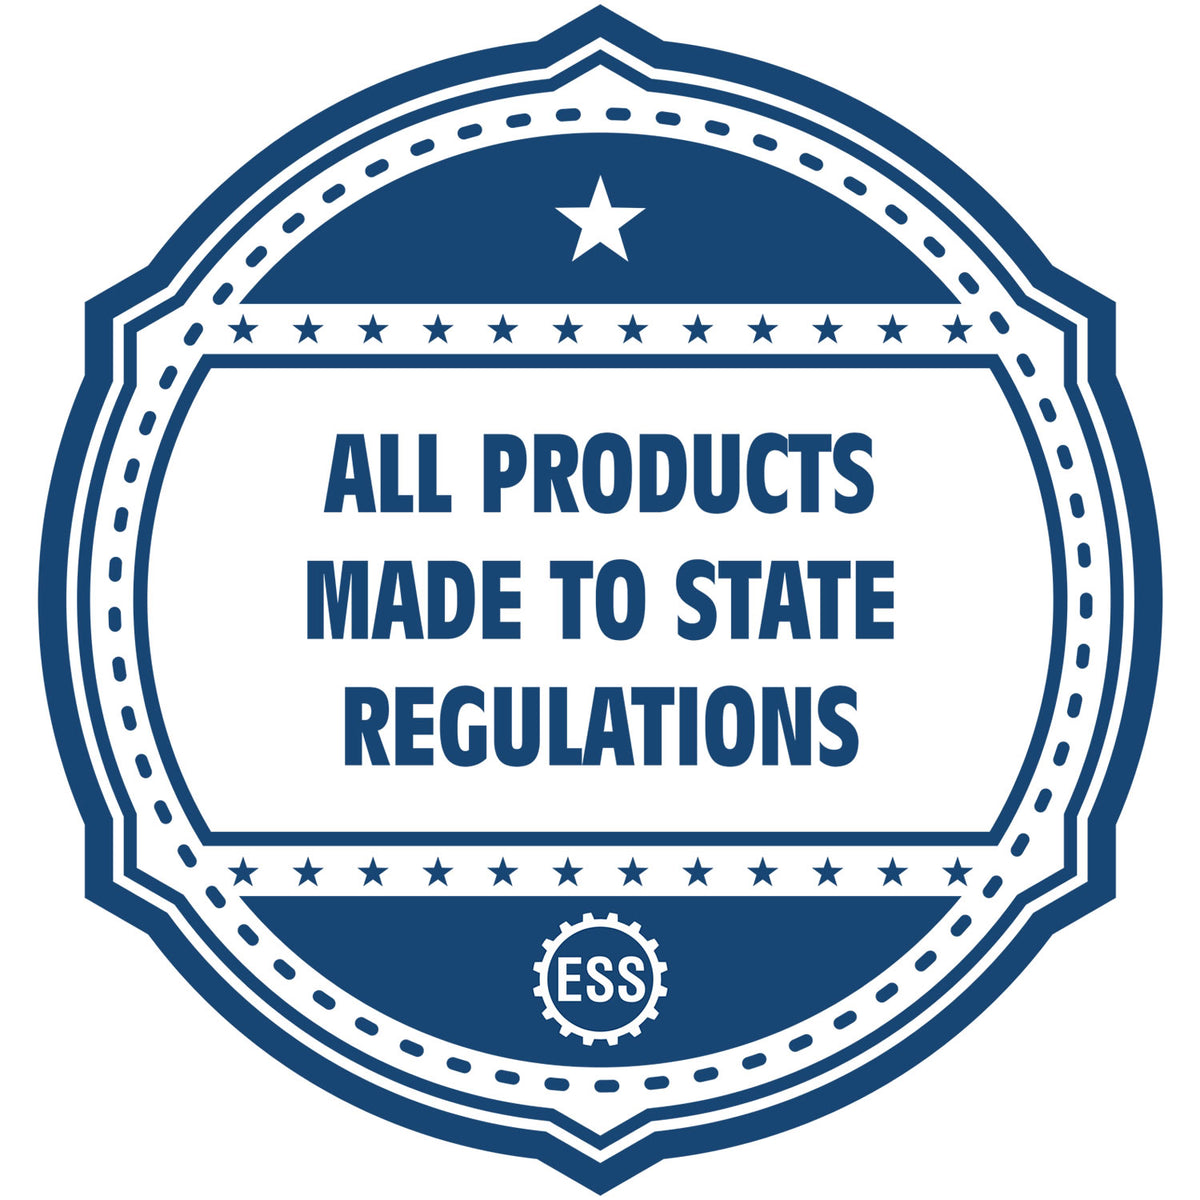 A blue icon or badge for the Gift Texas Architect Seal showing that this product is made in compliance with state regulations.